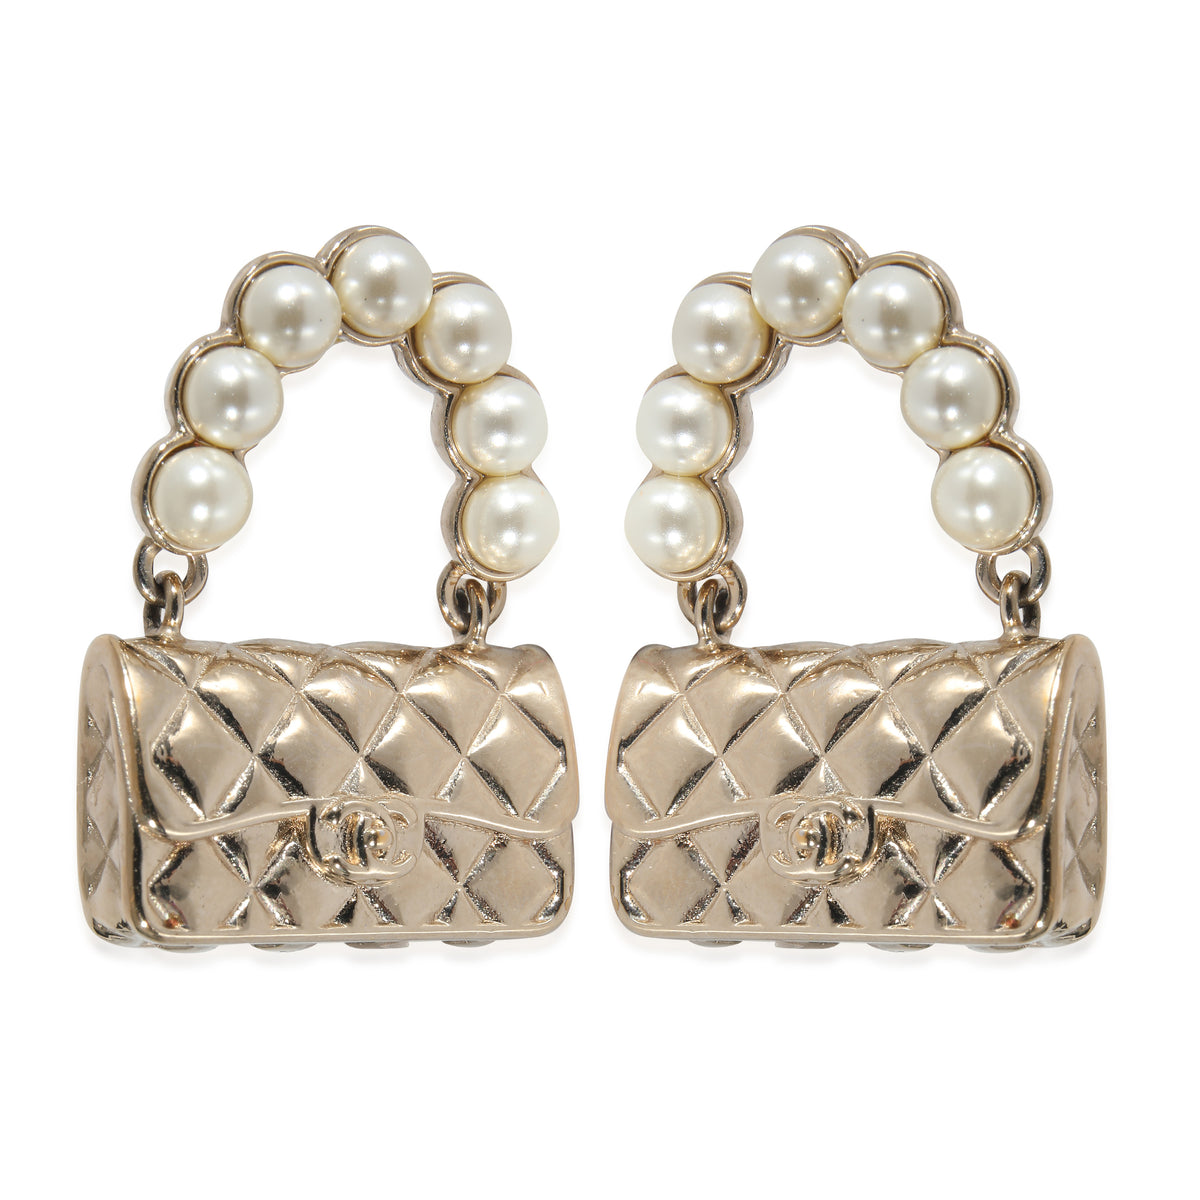 Chanel 2021 Flap Bags Gold Plated Earrings, myGemma